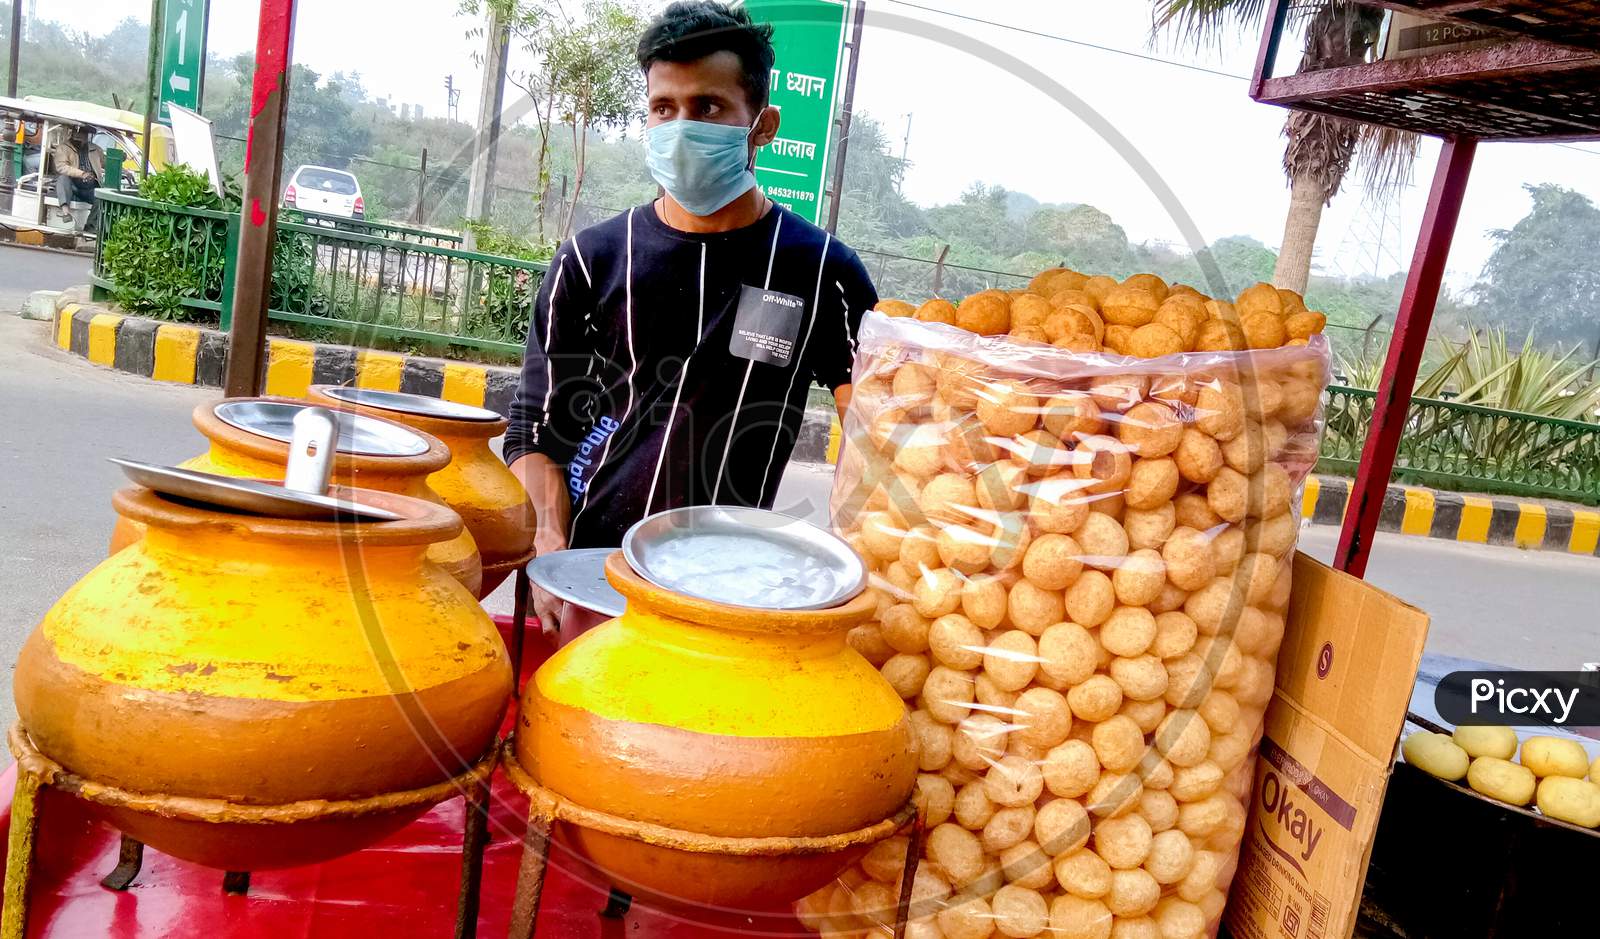 A Man Wearing A Mask Selling Golgappas On The Street